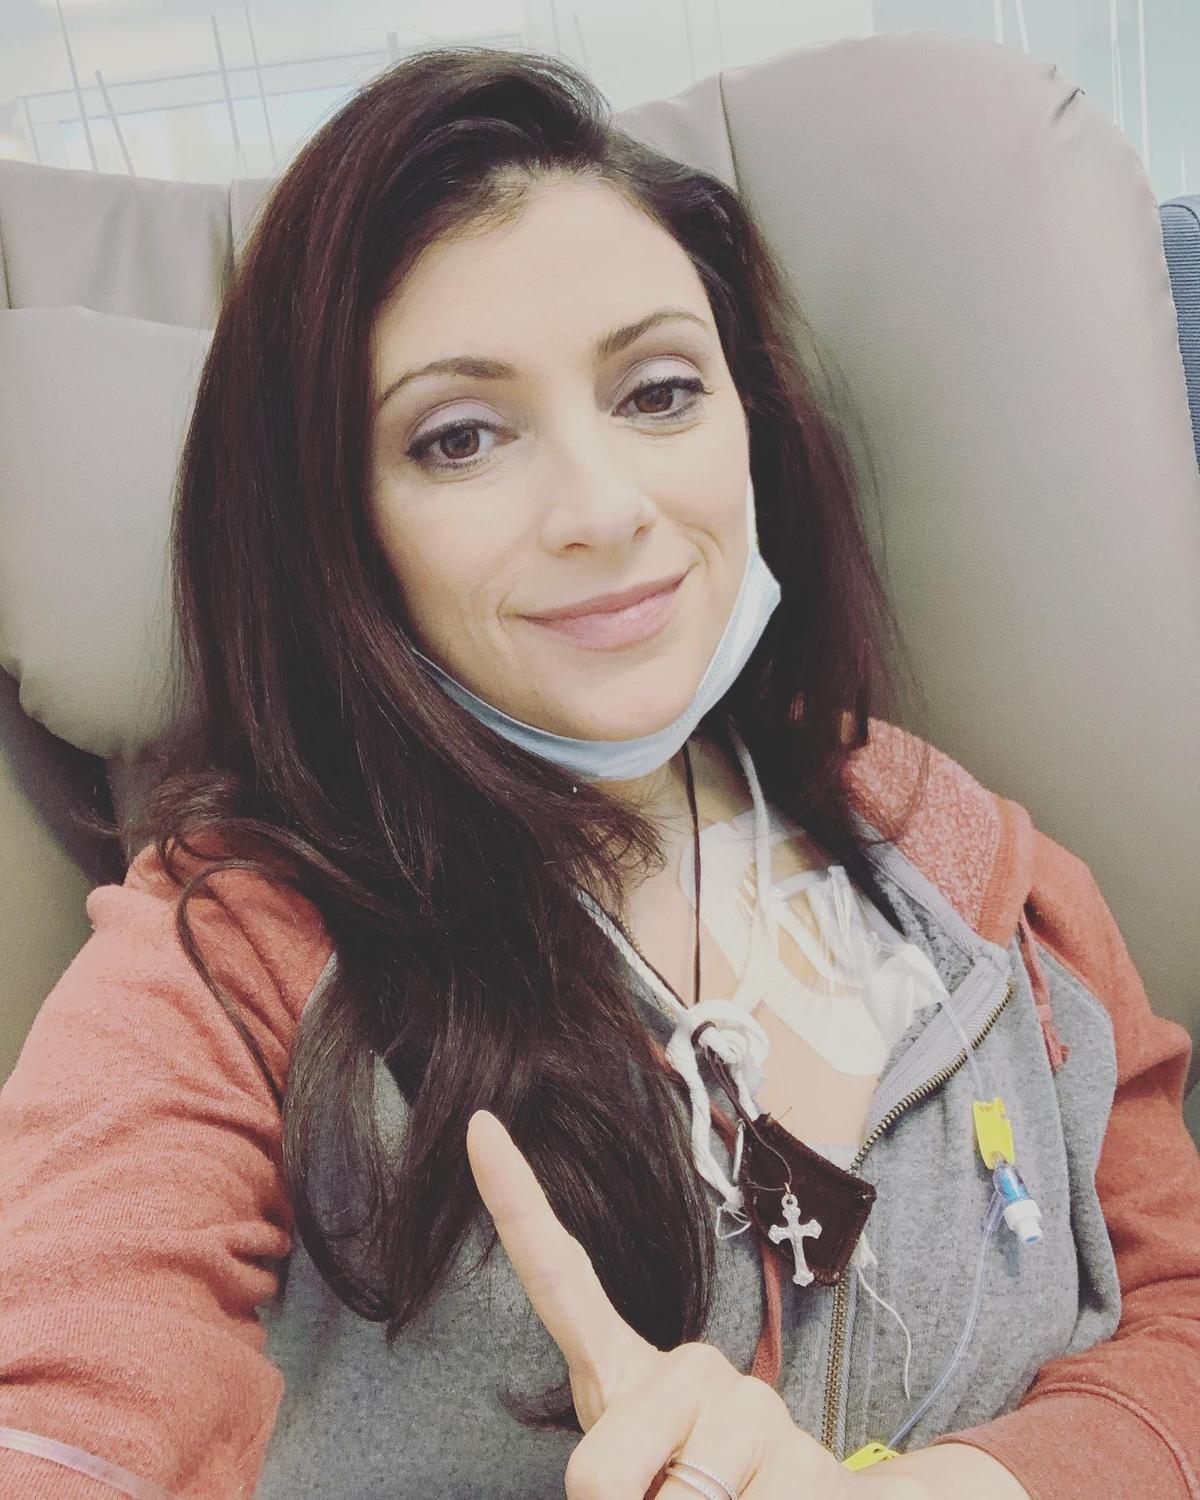 Jessica after the first dose of chemo at 20 weeks pregnant on Feb. 9, 2021. (Courtesy of <a href="https://www.instagram.com/blessed_by_cancer/">Jessica Hanna</a>)